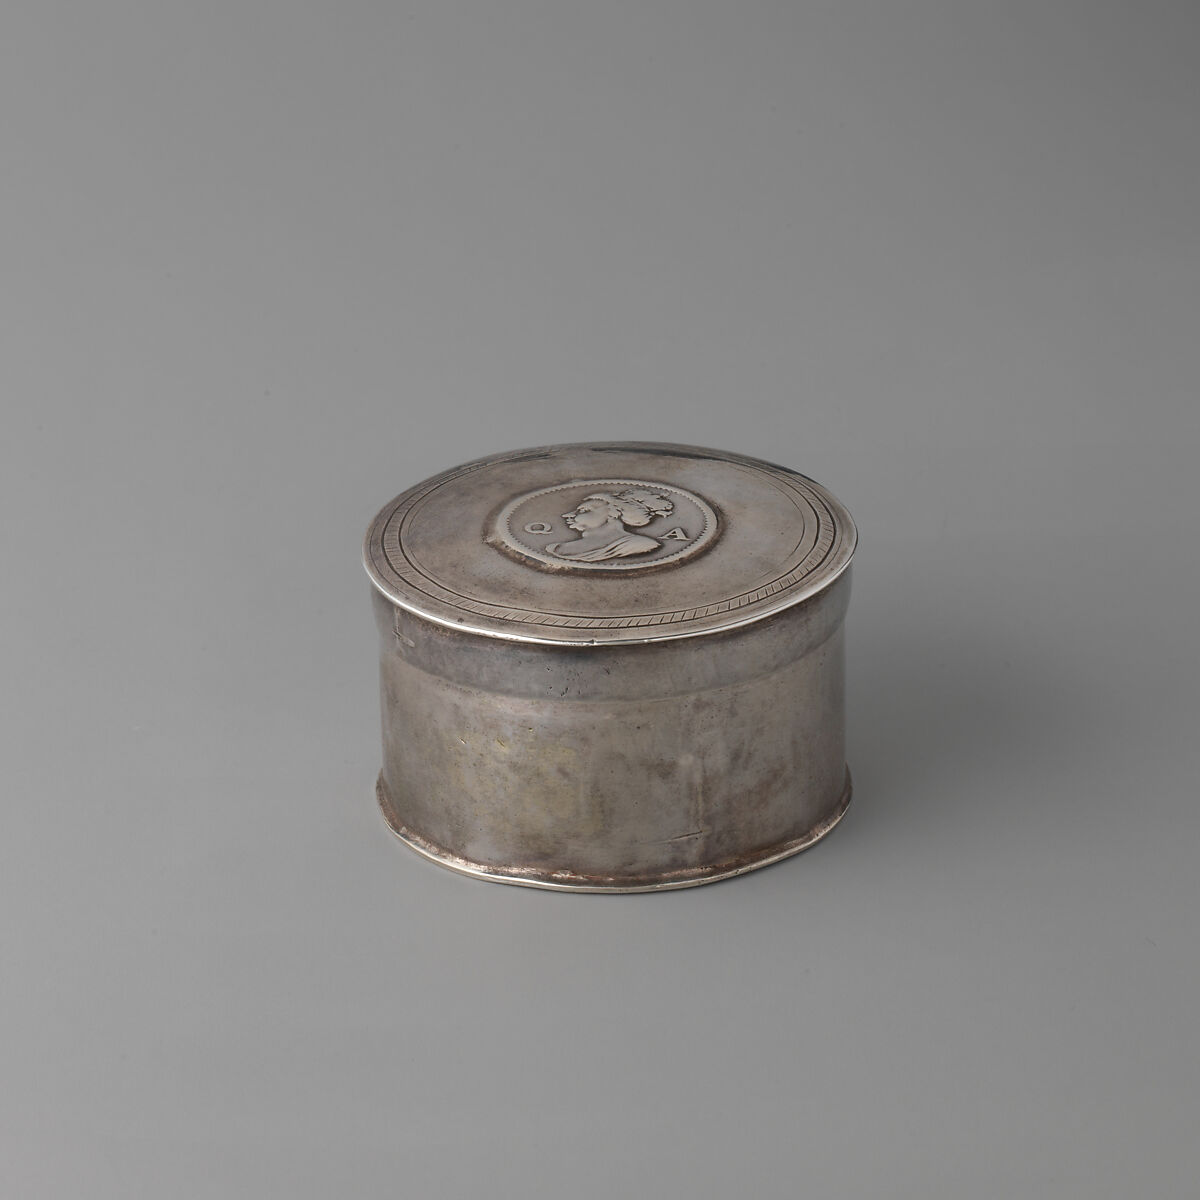 Miniature box with cover, T.K., London, Silver, British, London 